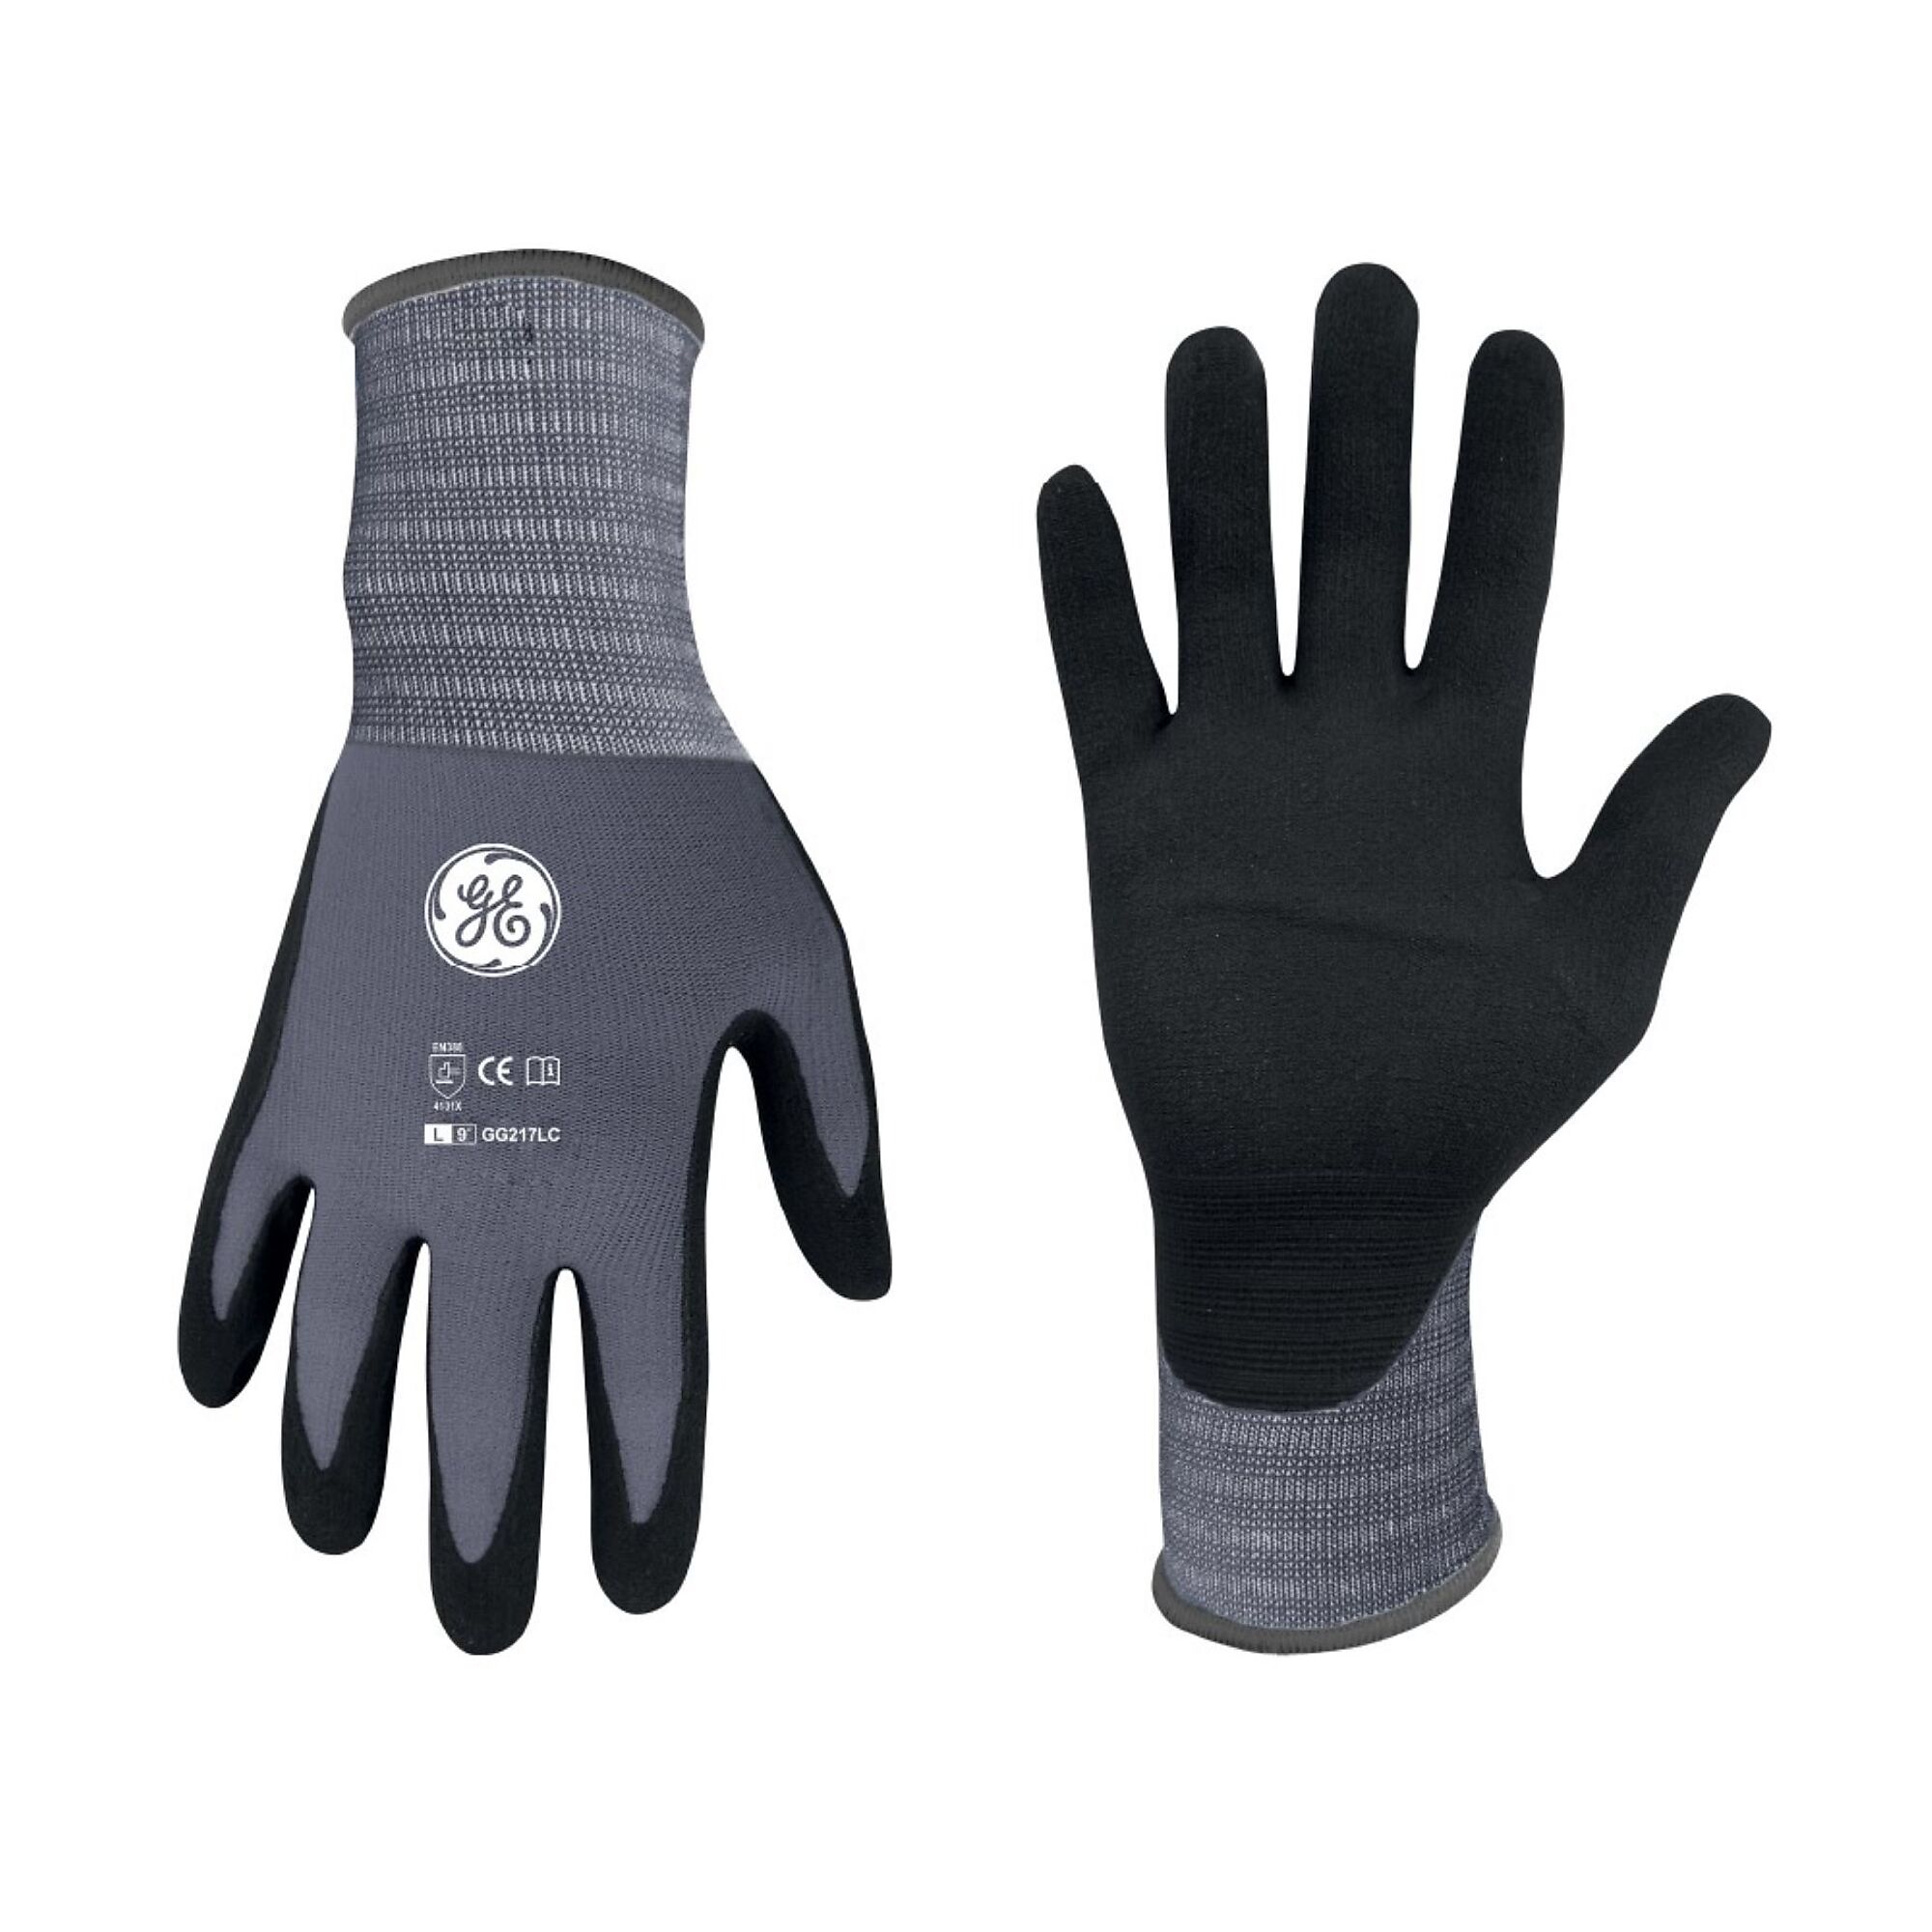 General Electric, Unisex Dipped Gloves Black/Gray L 12 pair, Size L, Included (qty.) 12, Model GG217L